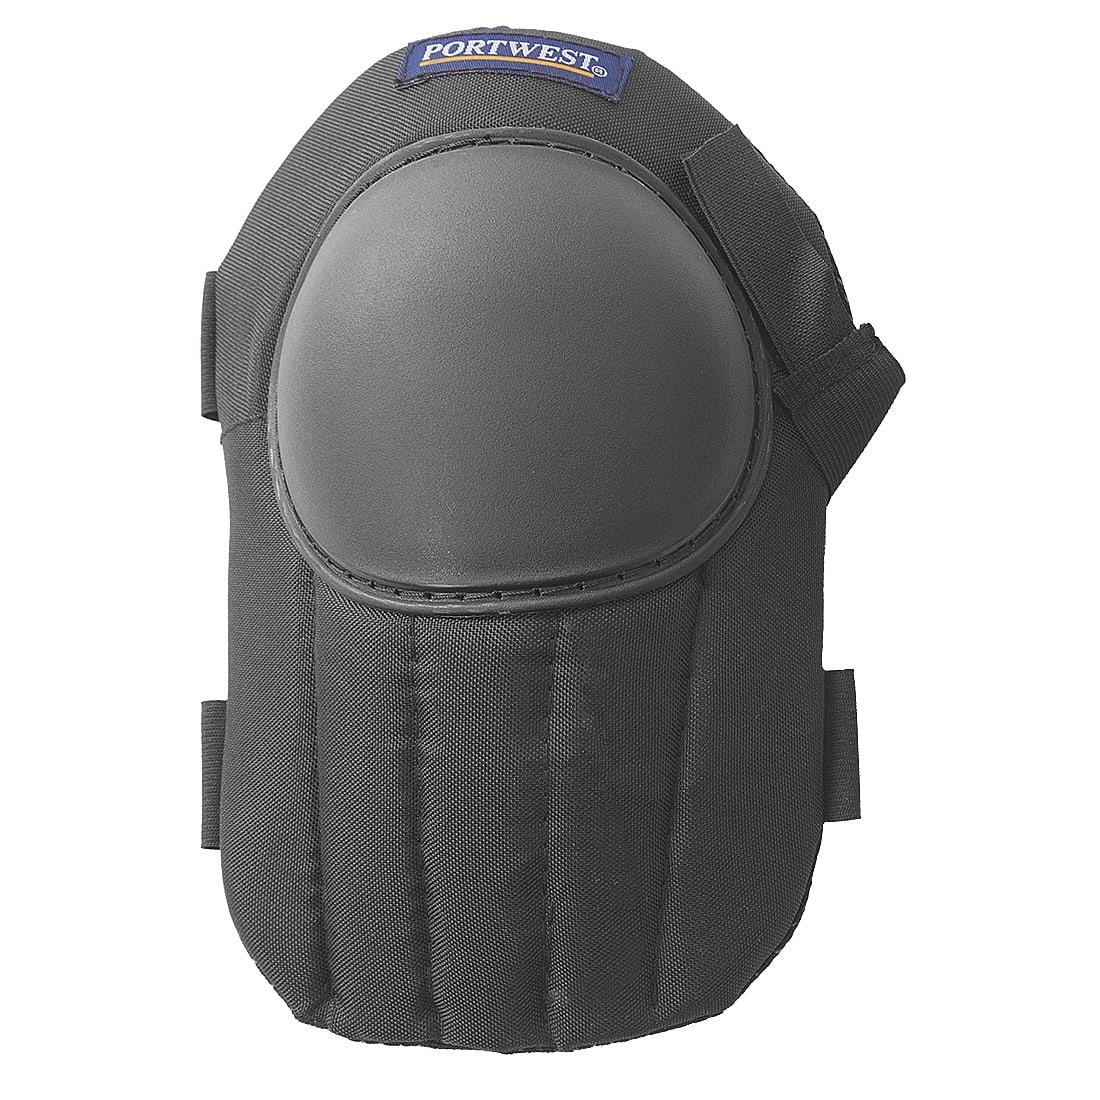 Portwest Lightweight Knee Pad in Black (Product Code: KP20)